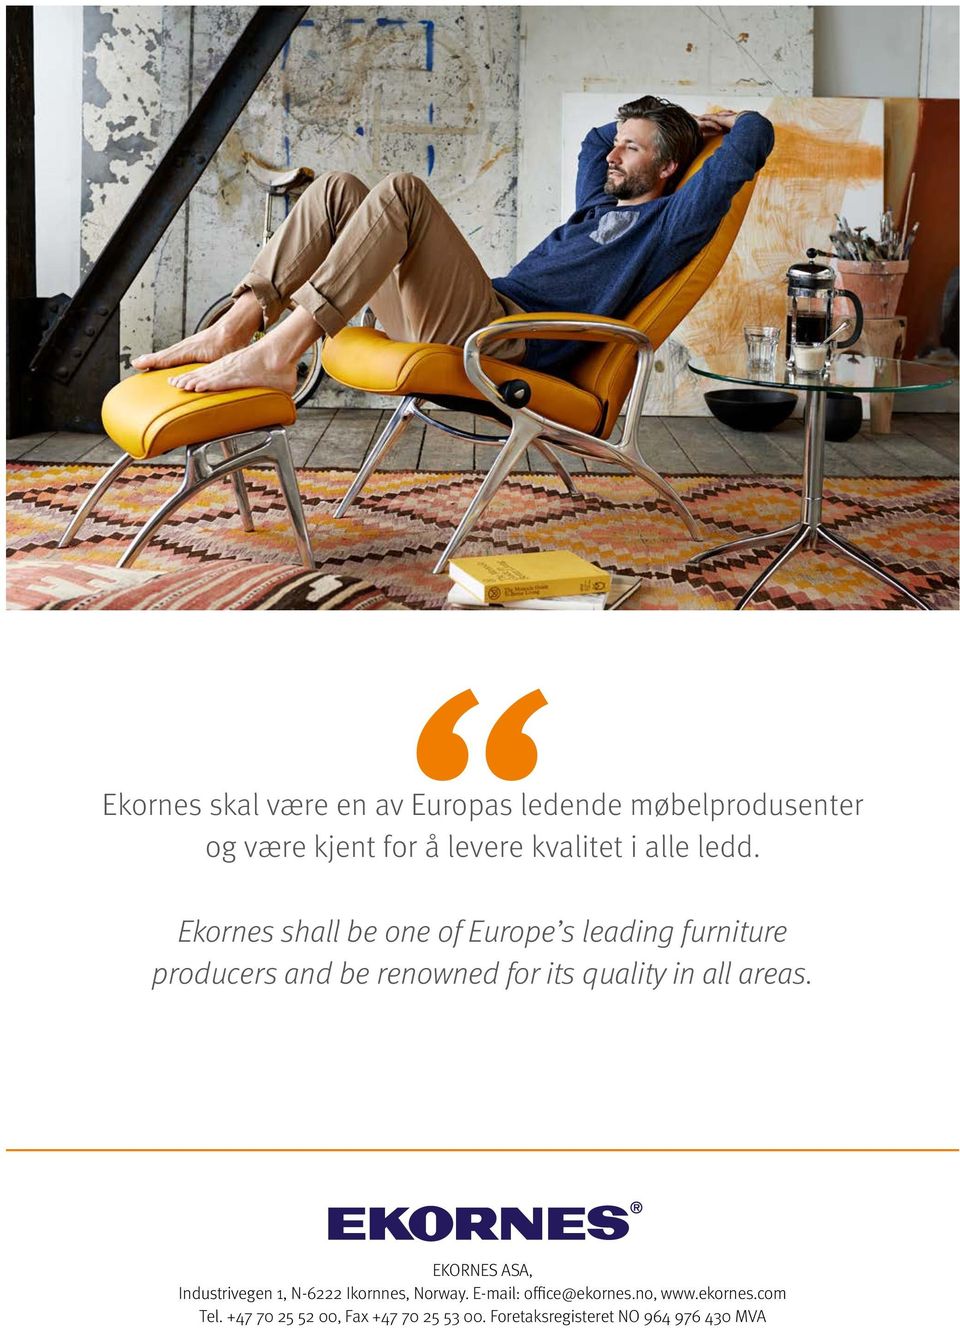 Ekornes shall be one of Europe s leading furniture producers and be renowned for its quality in